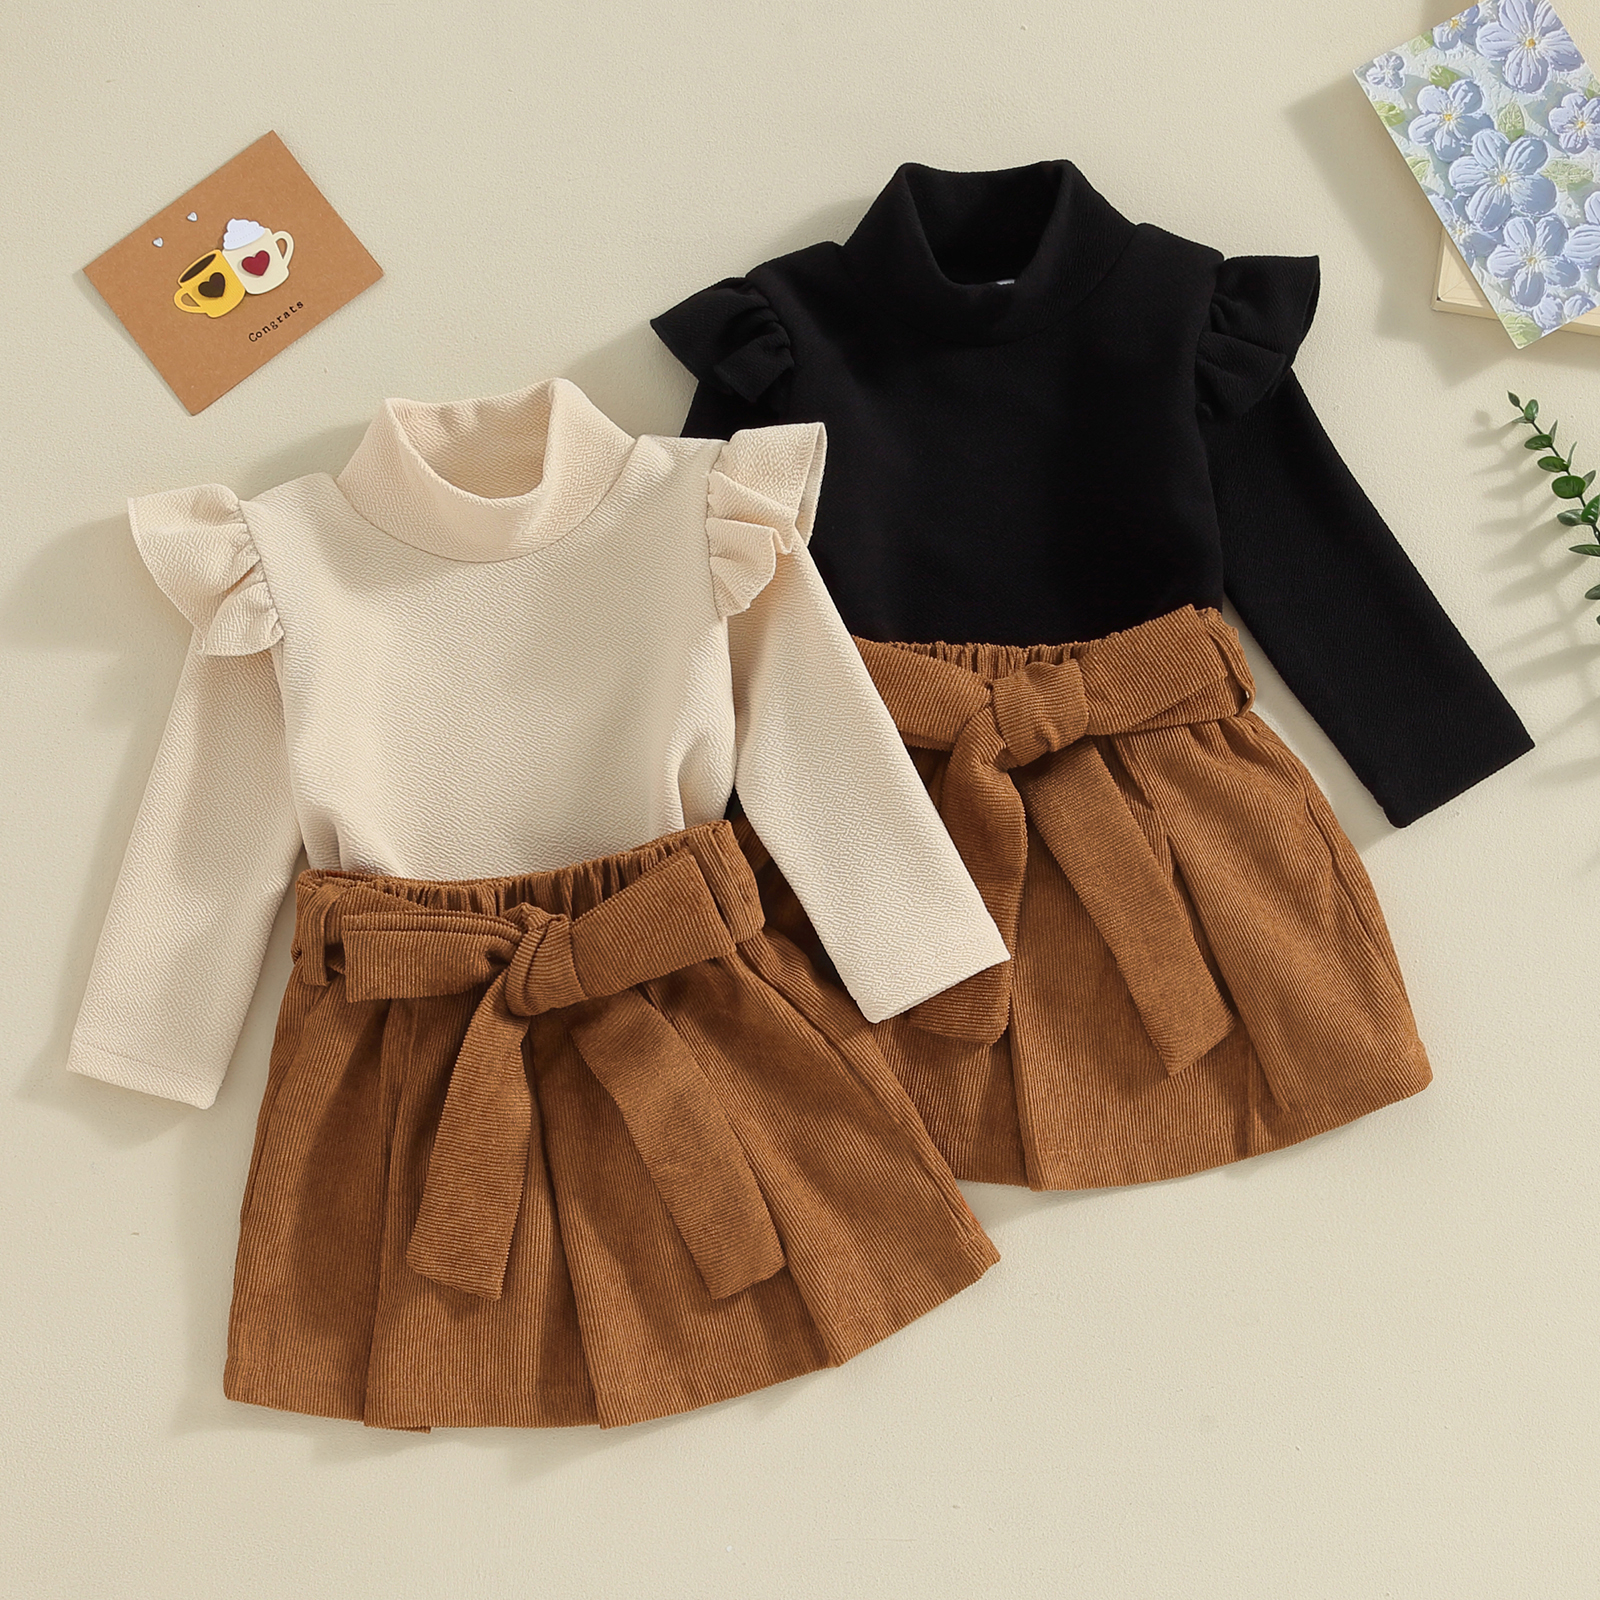 Heartandsoul- Stylish Toddler Girl Fall 2Pcs Good Quality Outfits Long